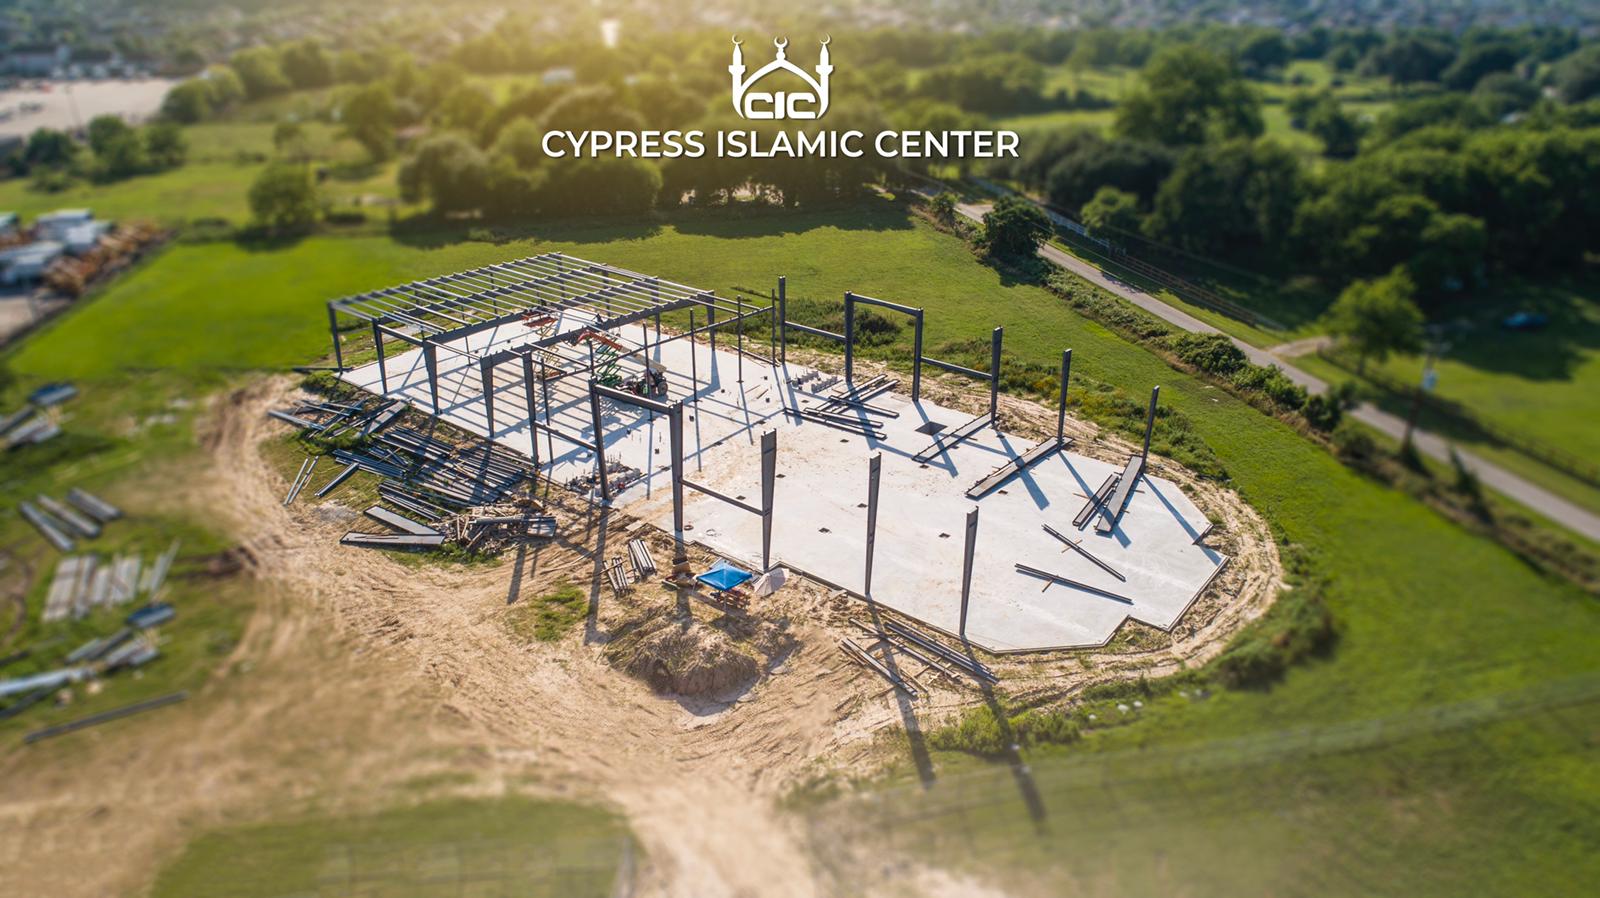 Cypress Islamic Center Construction update, May 6, 2020